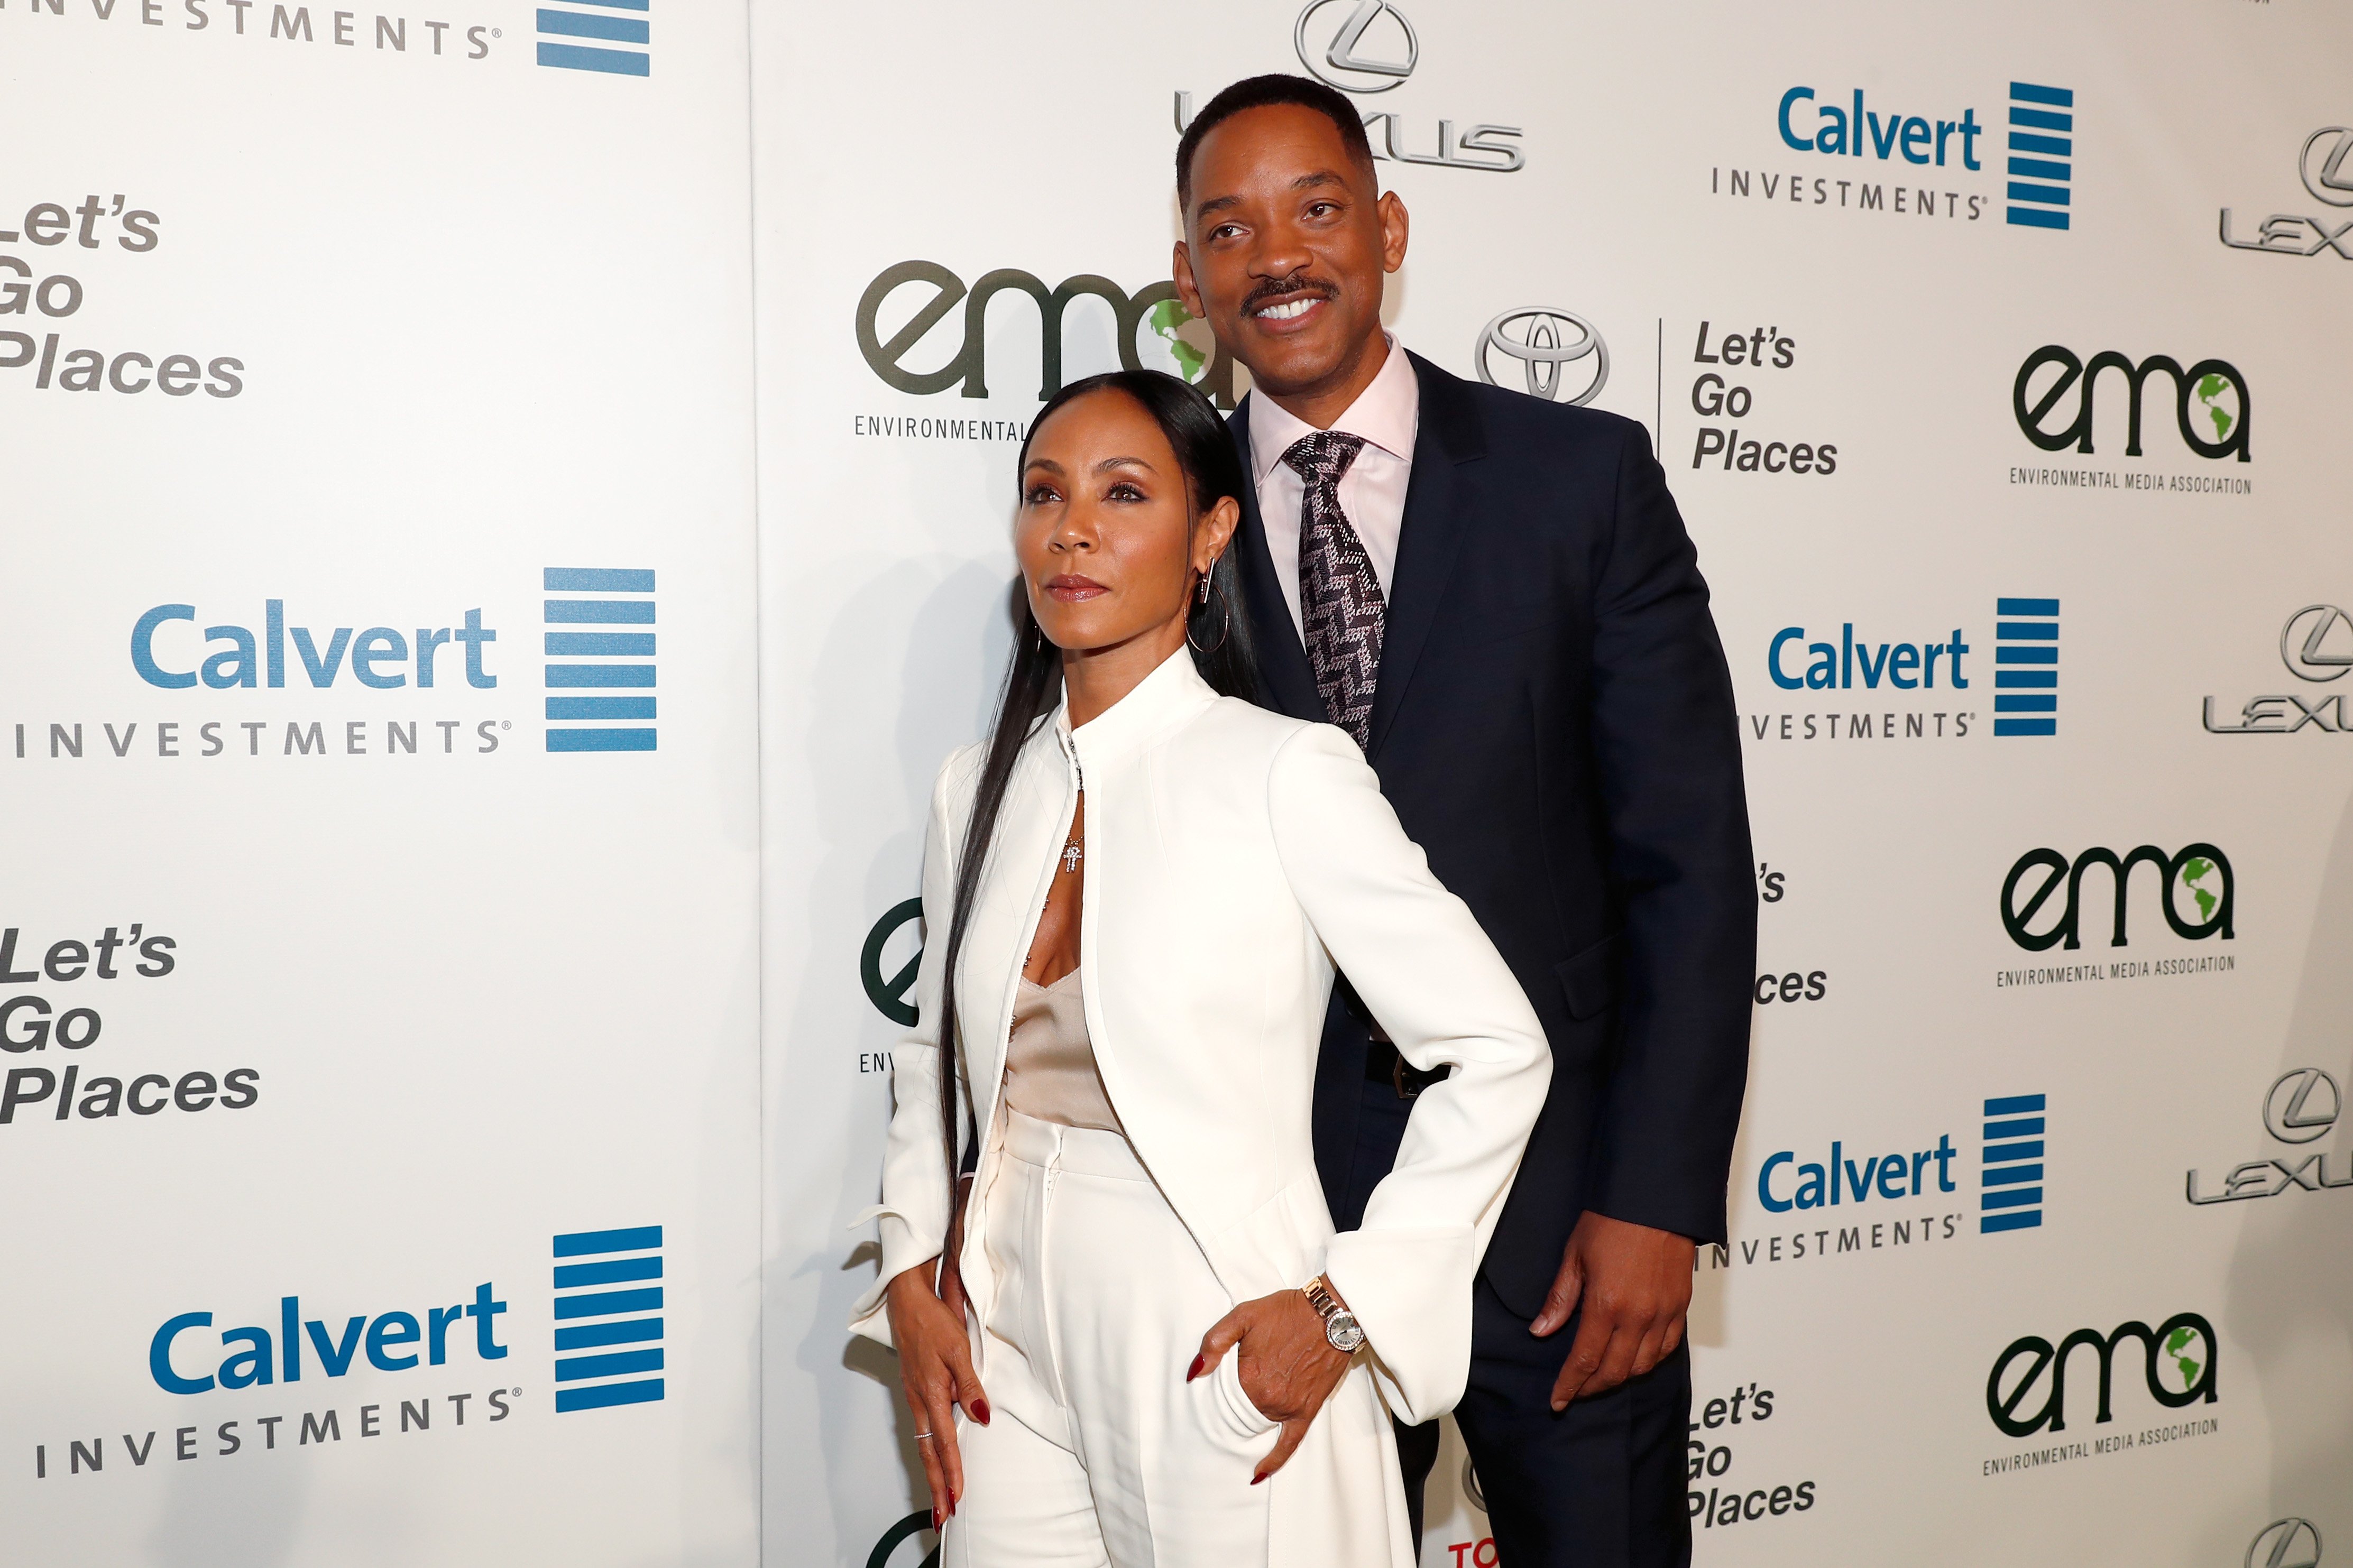 Actors Jada Pinkett Smith (L) and Will Smith attend the Environmental Media Association 26th Annual EMA Awards Presented By Toyota, Lexus And Calvert at Warner Bros. Studios on October 22, 2016| Photo: Getty Images